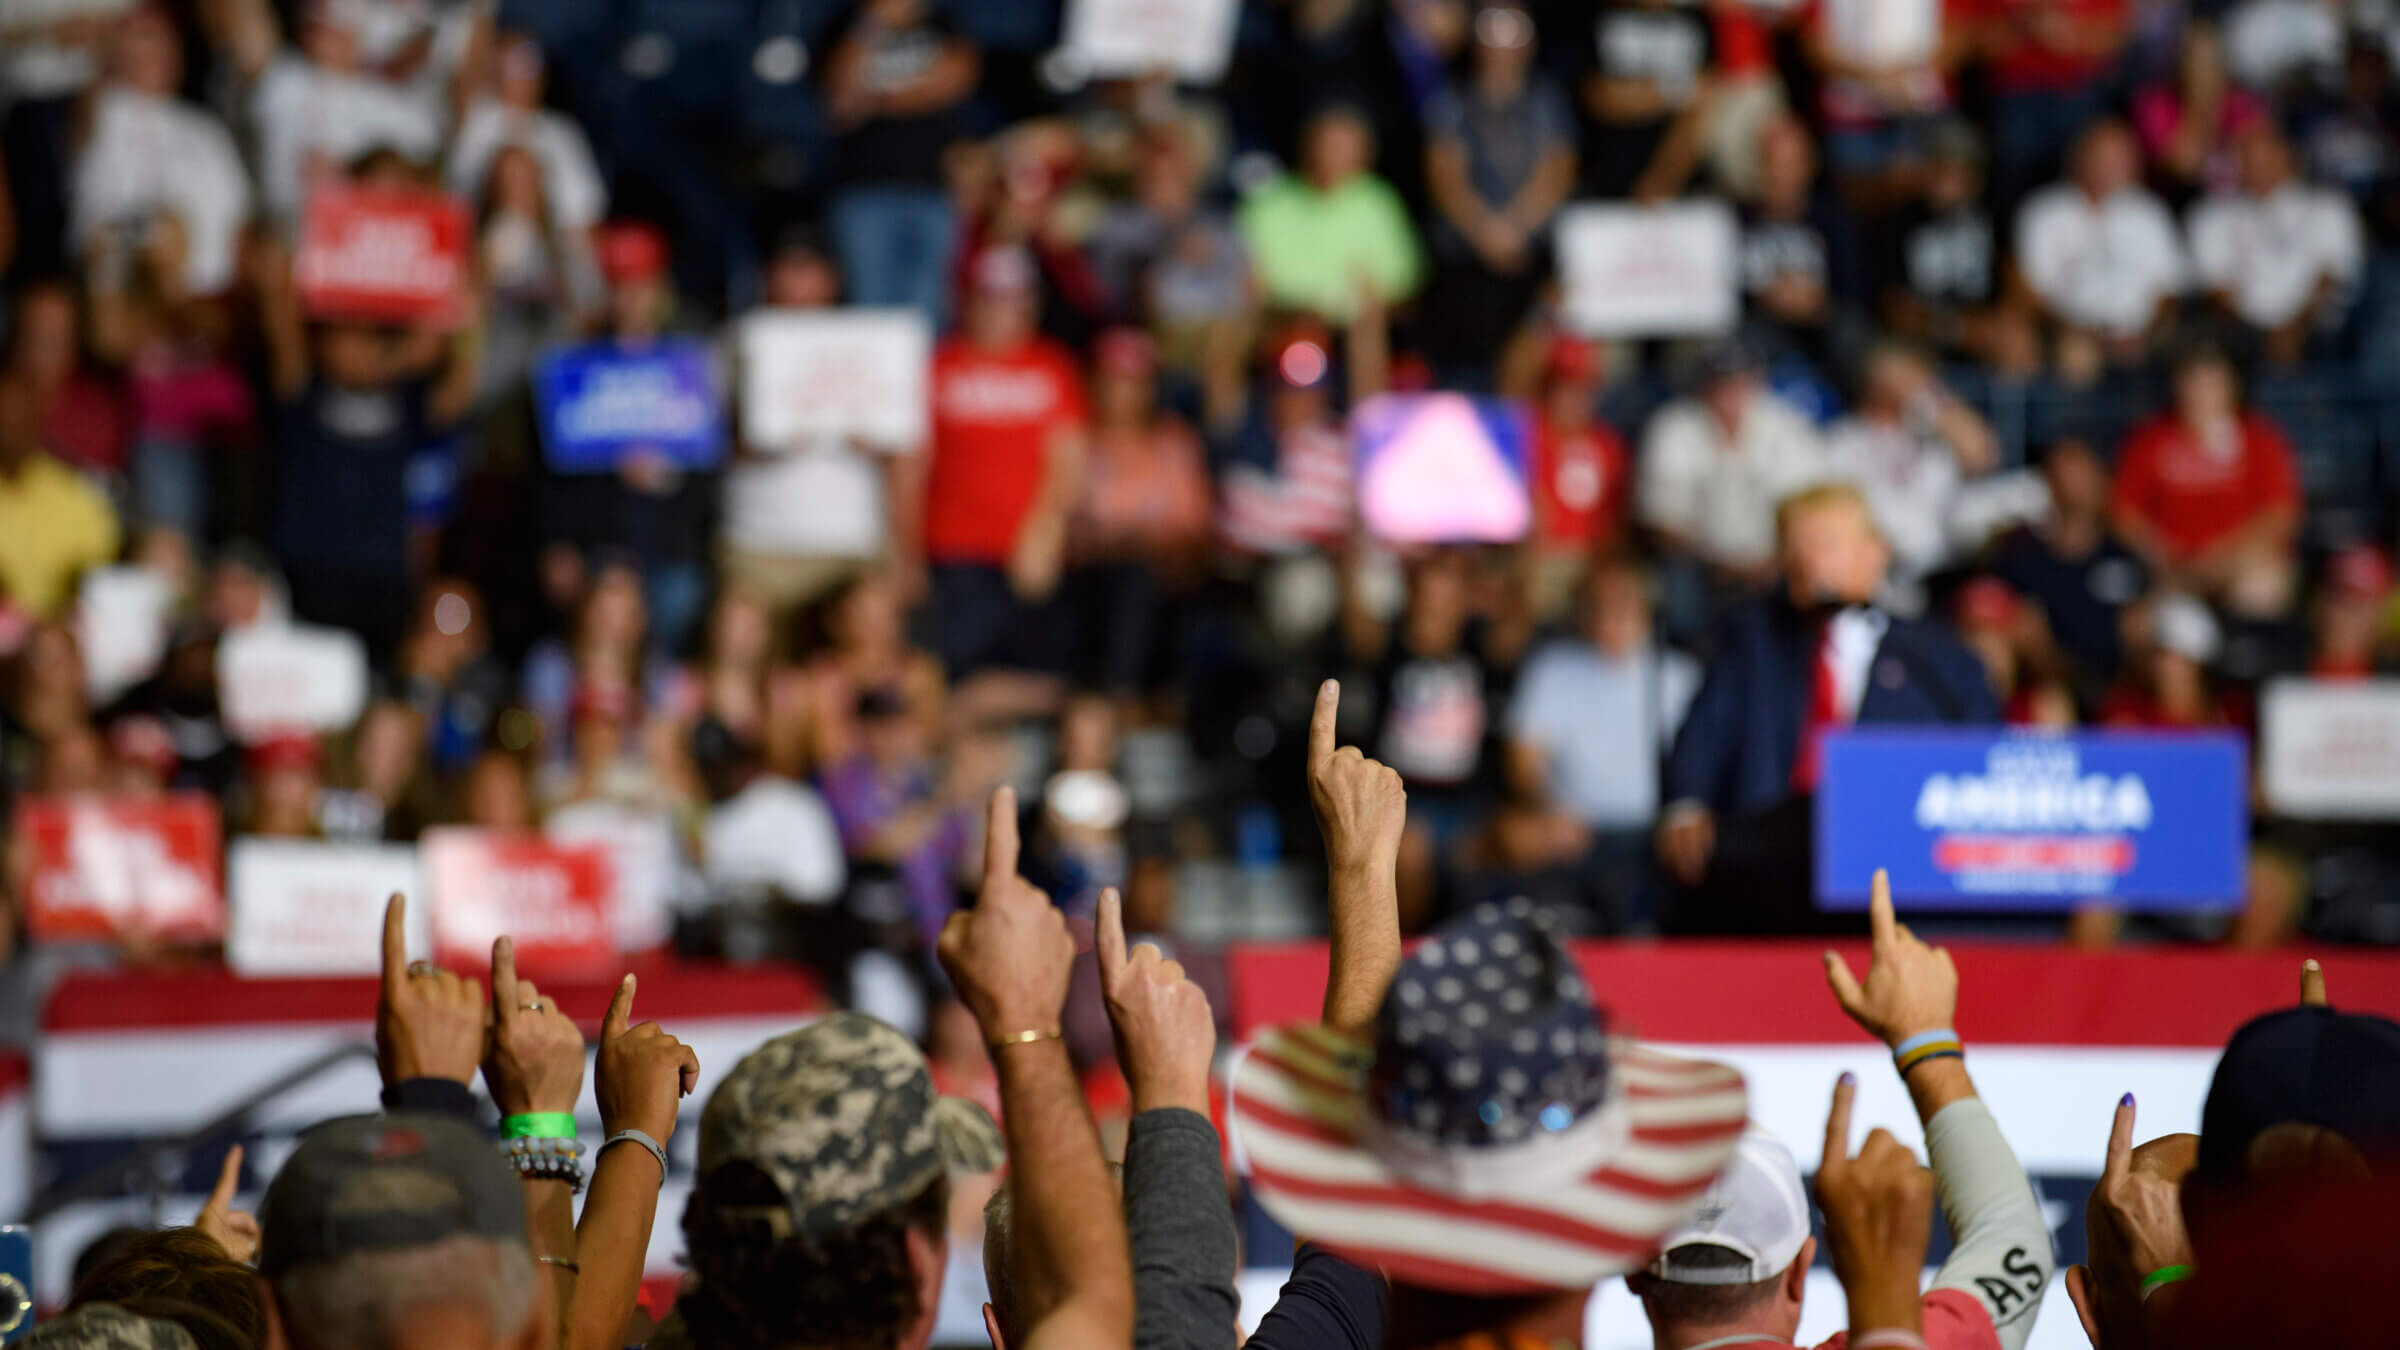 Audience members put their index finger up while President Donald Trump speaks at a Save America Rally.